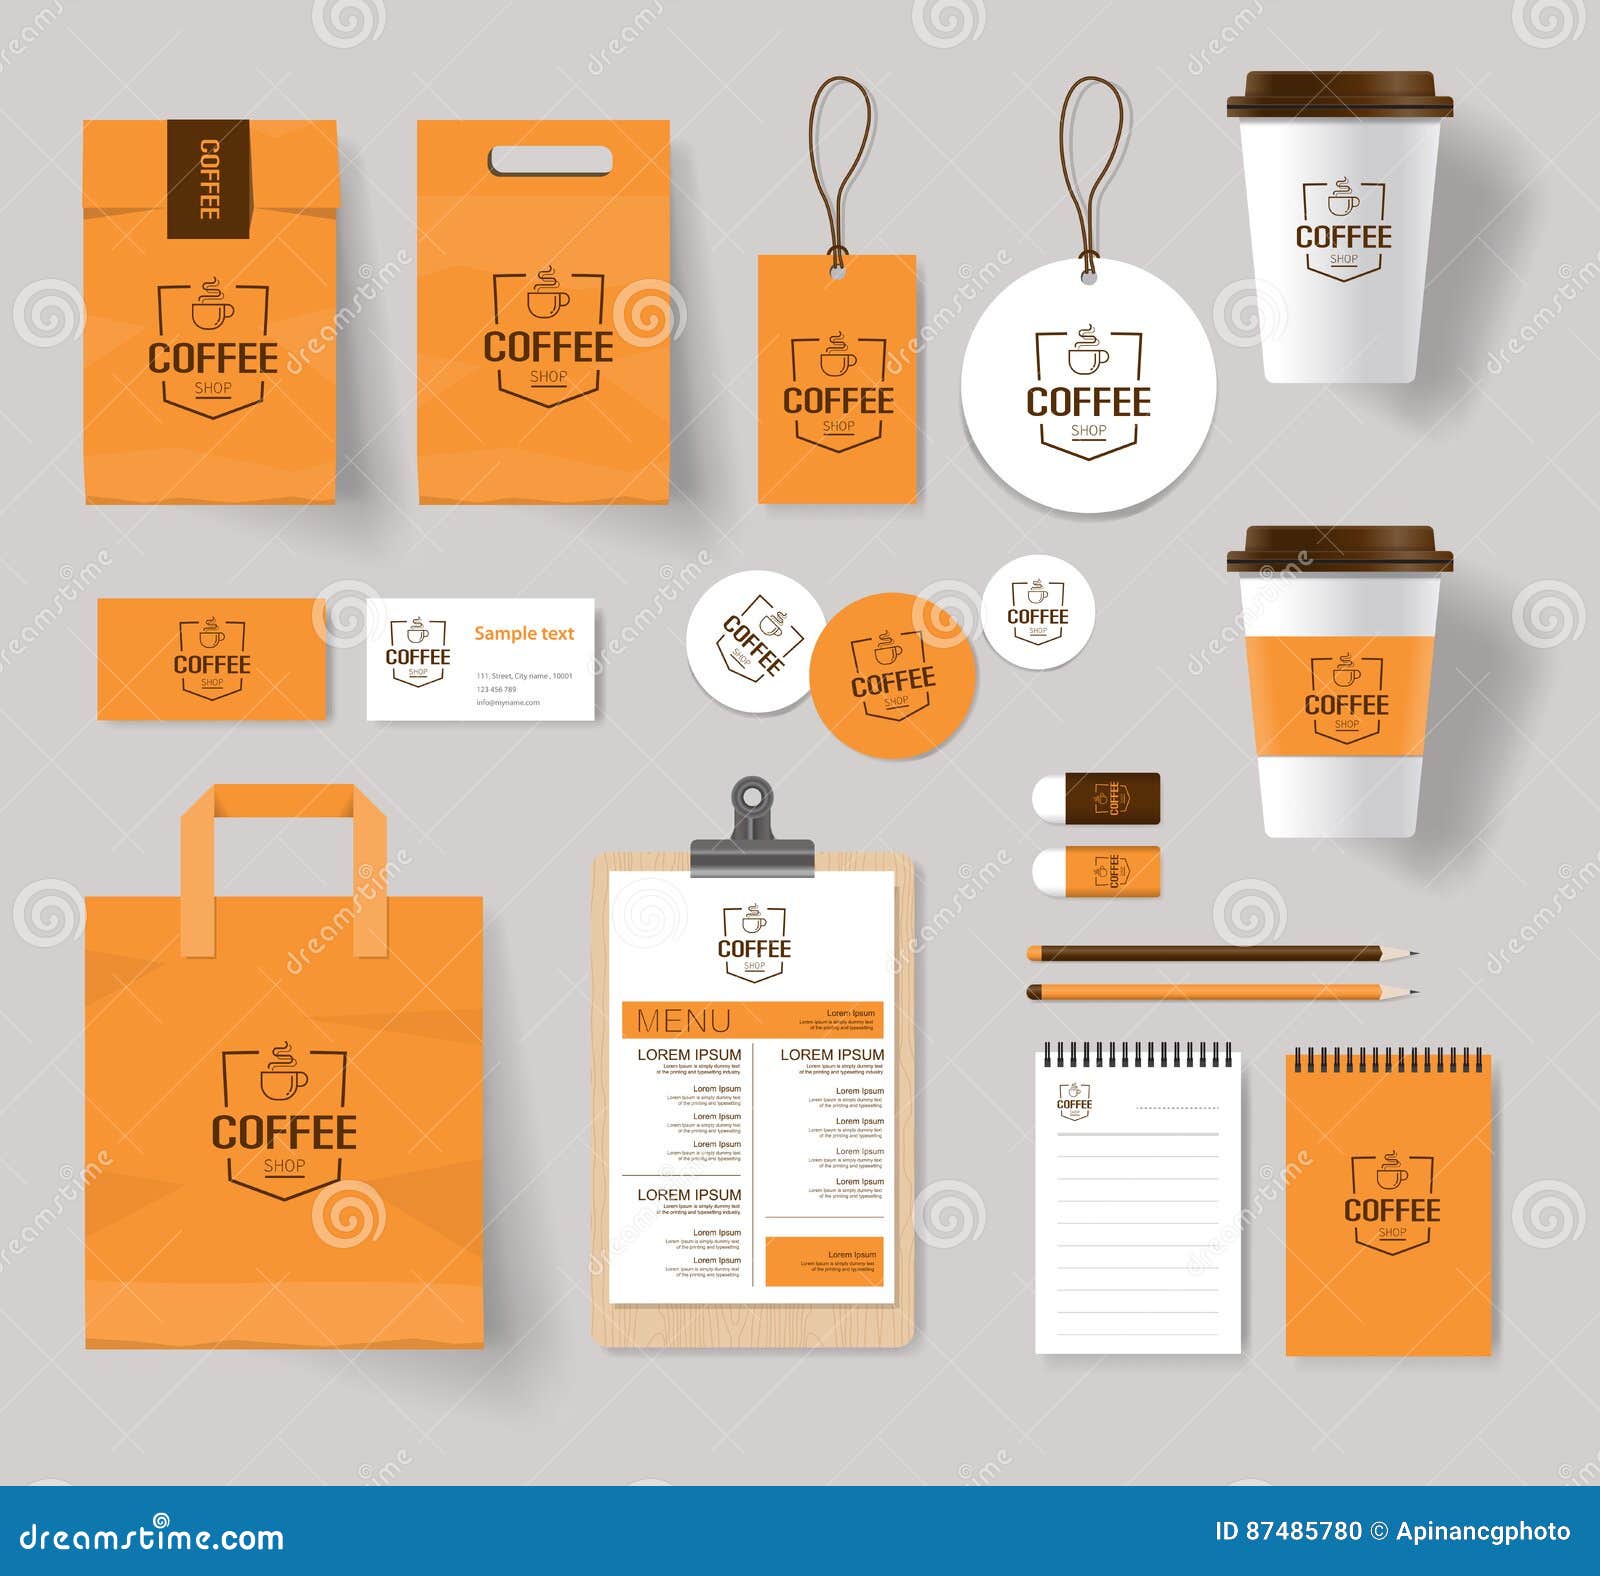 Download Corporate Branding Identity Mock Up Template For Coffee Shop Stock Vector - Illustration of ...